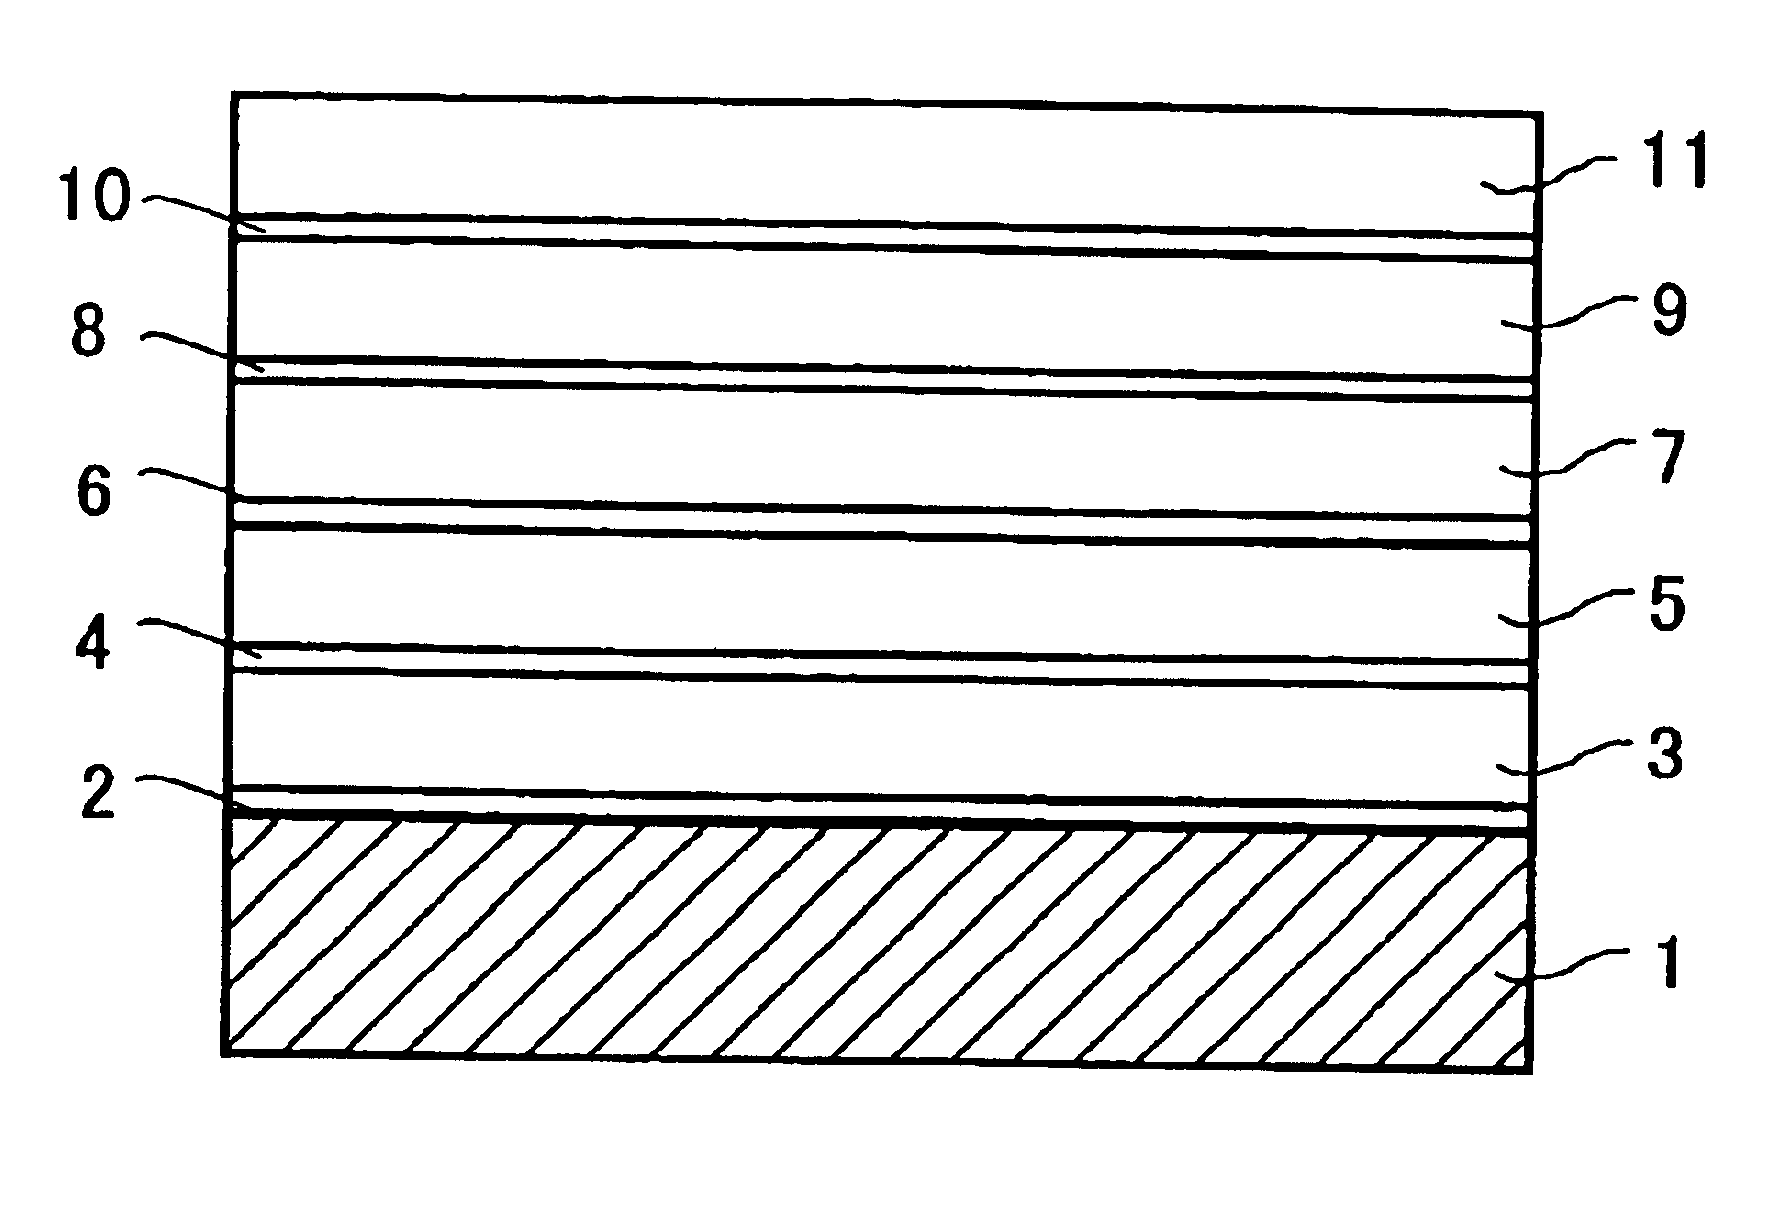 Thin permanent-magnet film and process for producing the same